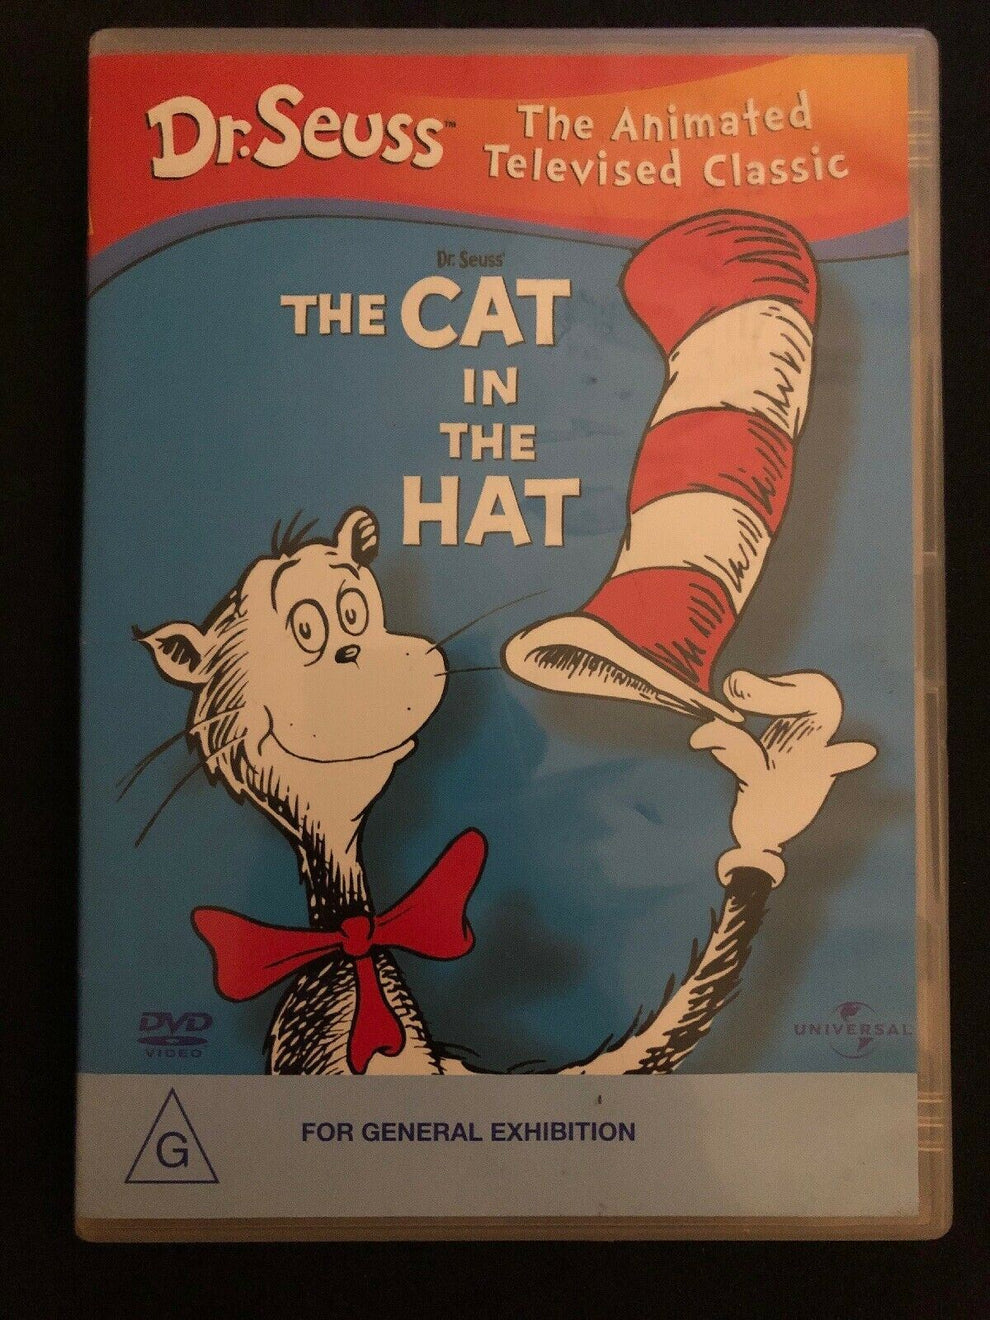 Dr. Seuss The Animated Televised Classic - The Cat In The Hat DVD ...